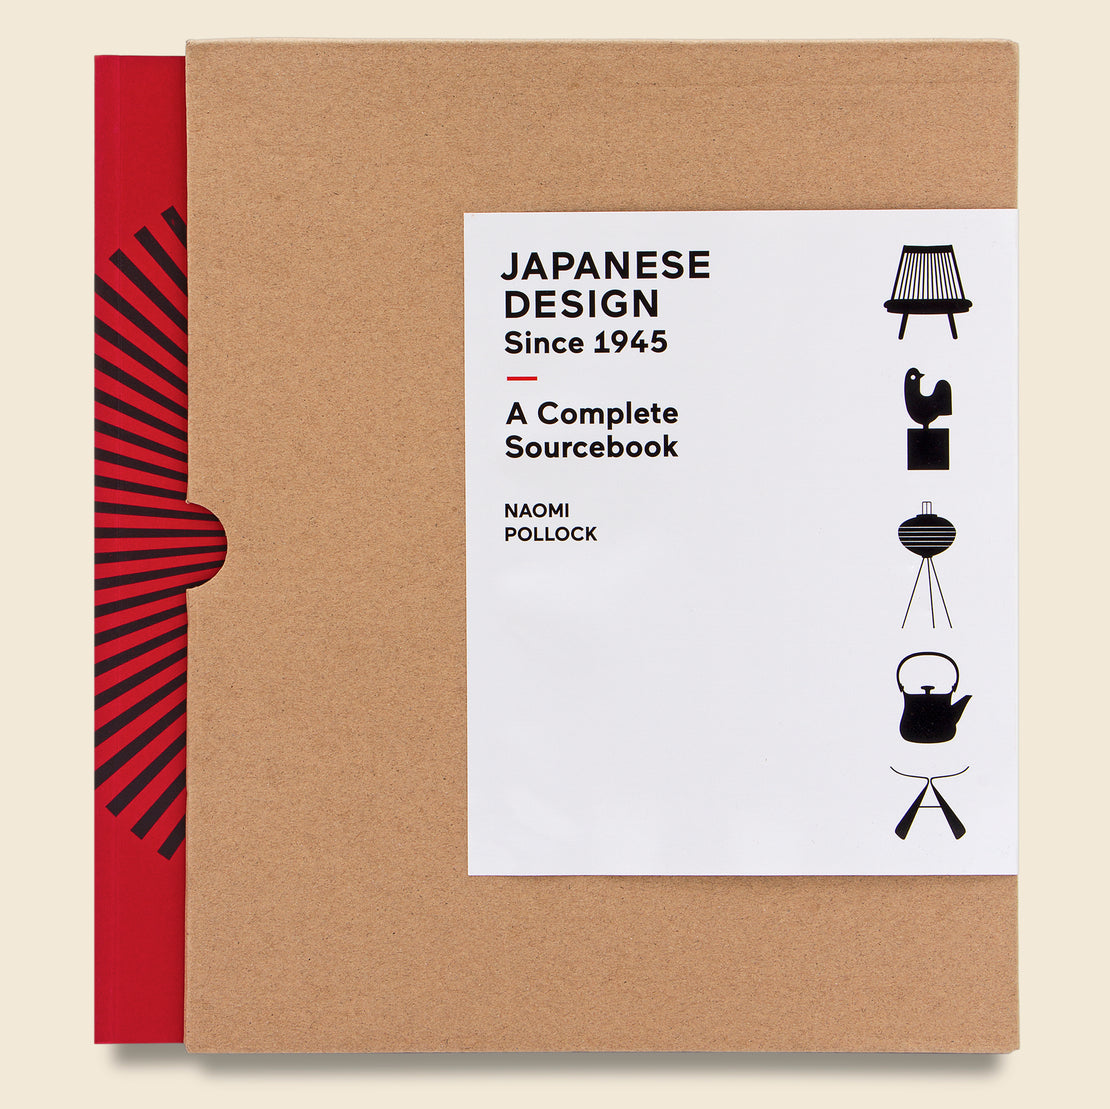 Japanese Design Since 1945 - Bookstore - STAG Provisions - Home - Library - Book